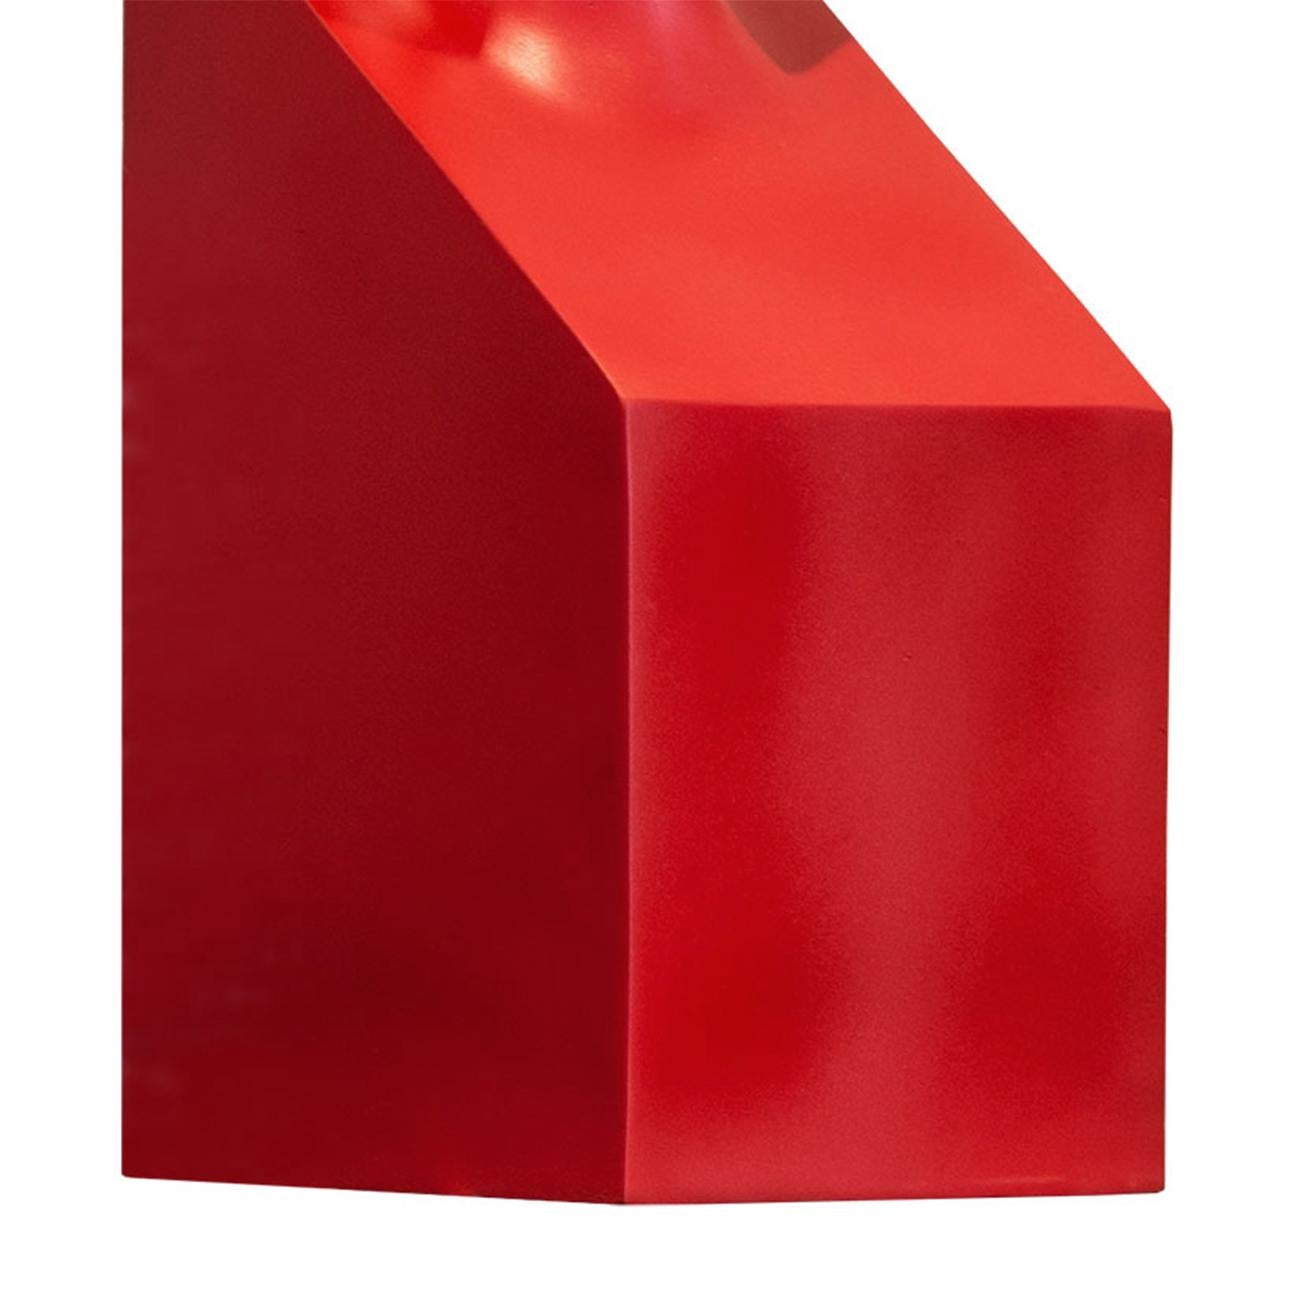 Belgian Stacy Red Resin Sculpture For Sale